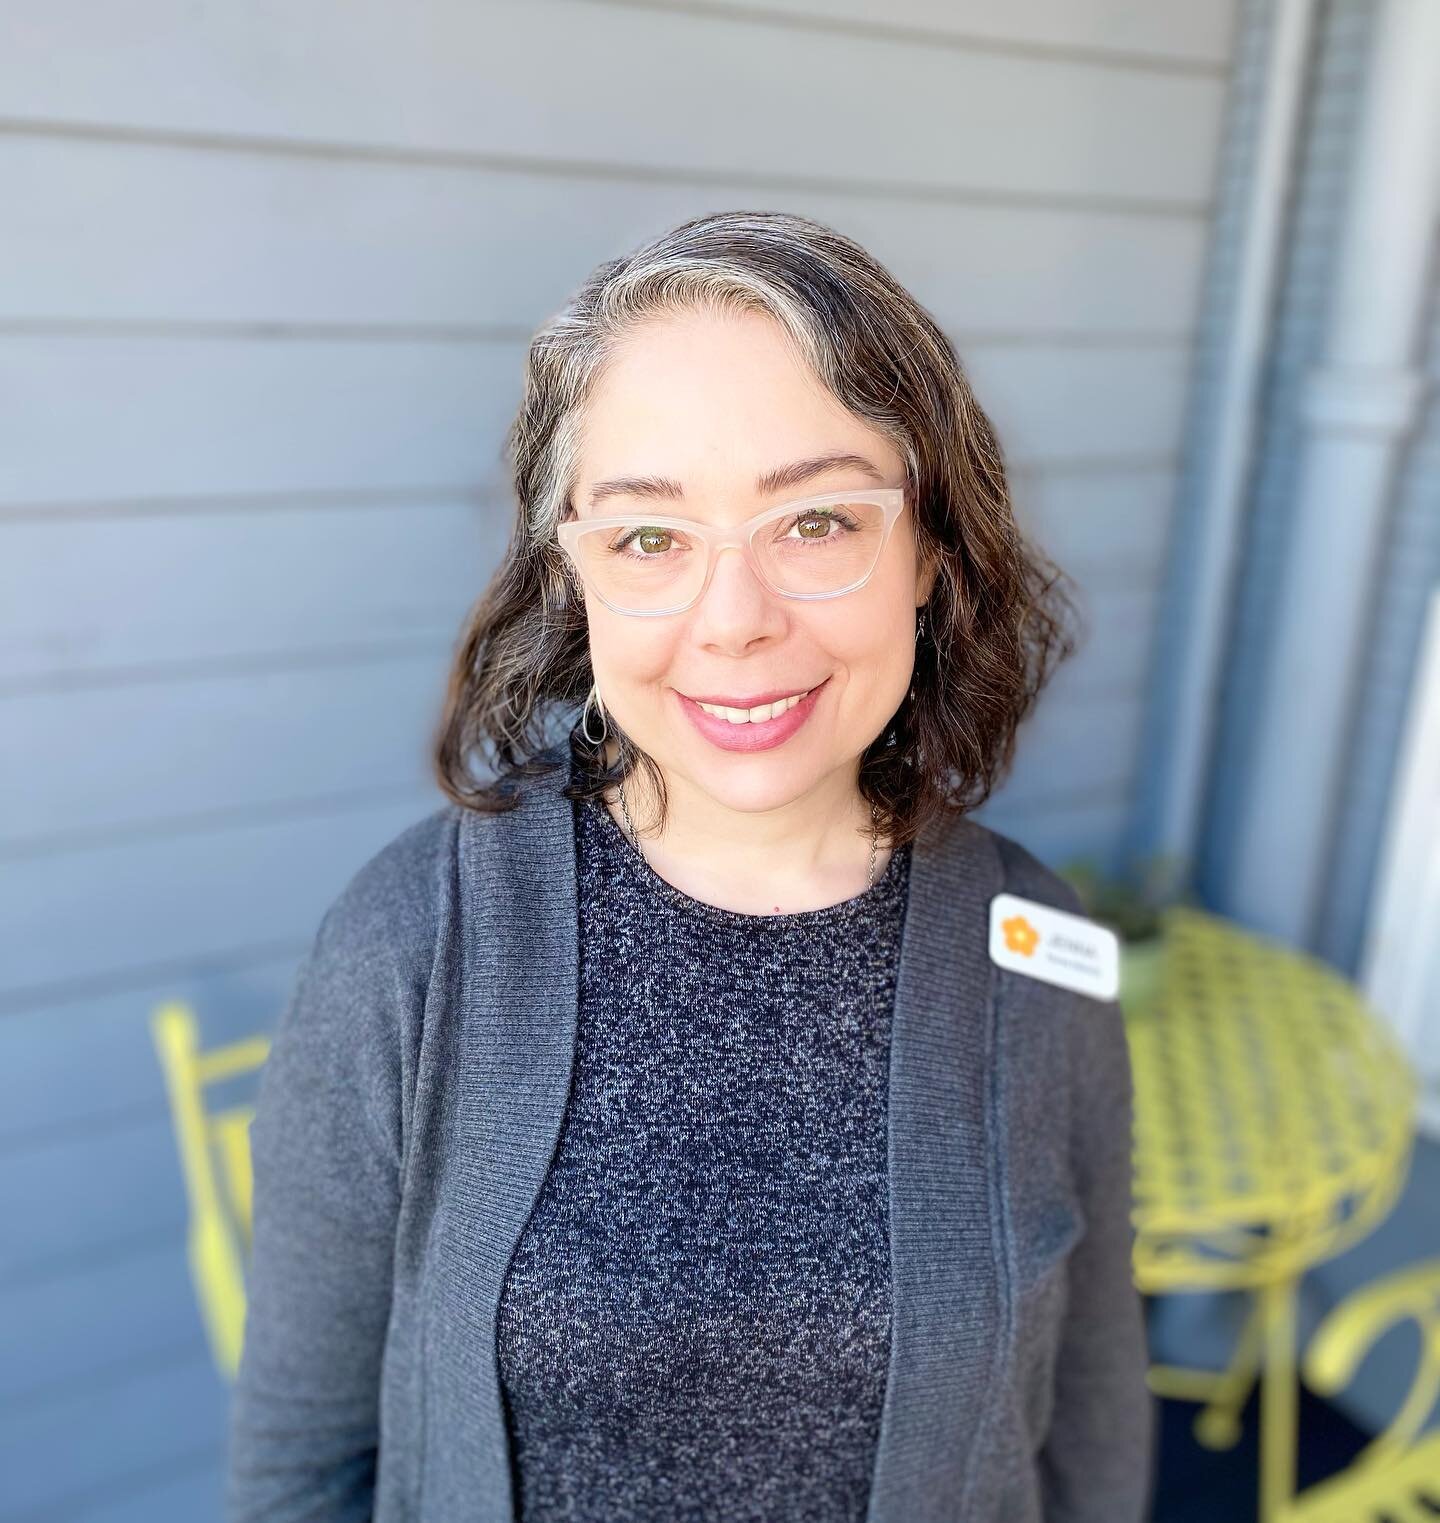 Last year's baby boom brought new talent to our team. We were so lucky to be joined by Jenna Shaw-Battista, PhD, NP, CNM in 2020! You may recognize Jenna from her time at Communicare in Davis.  Let's welcome her!